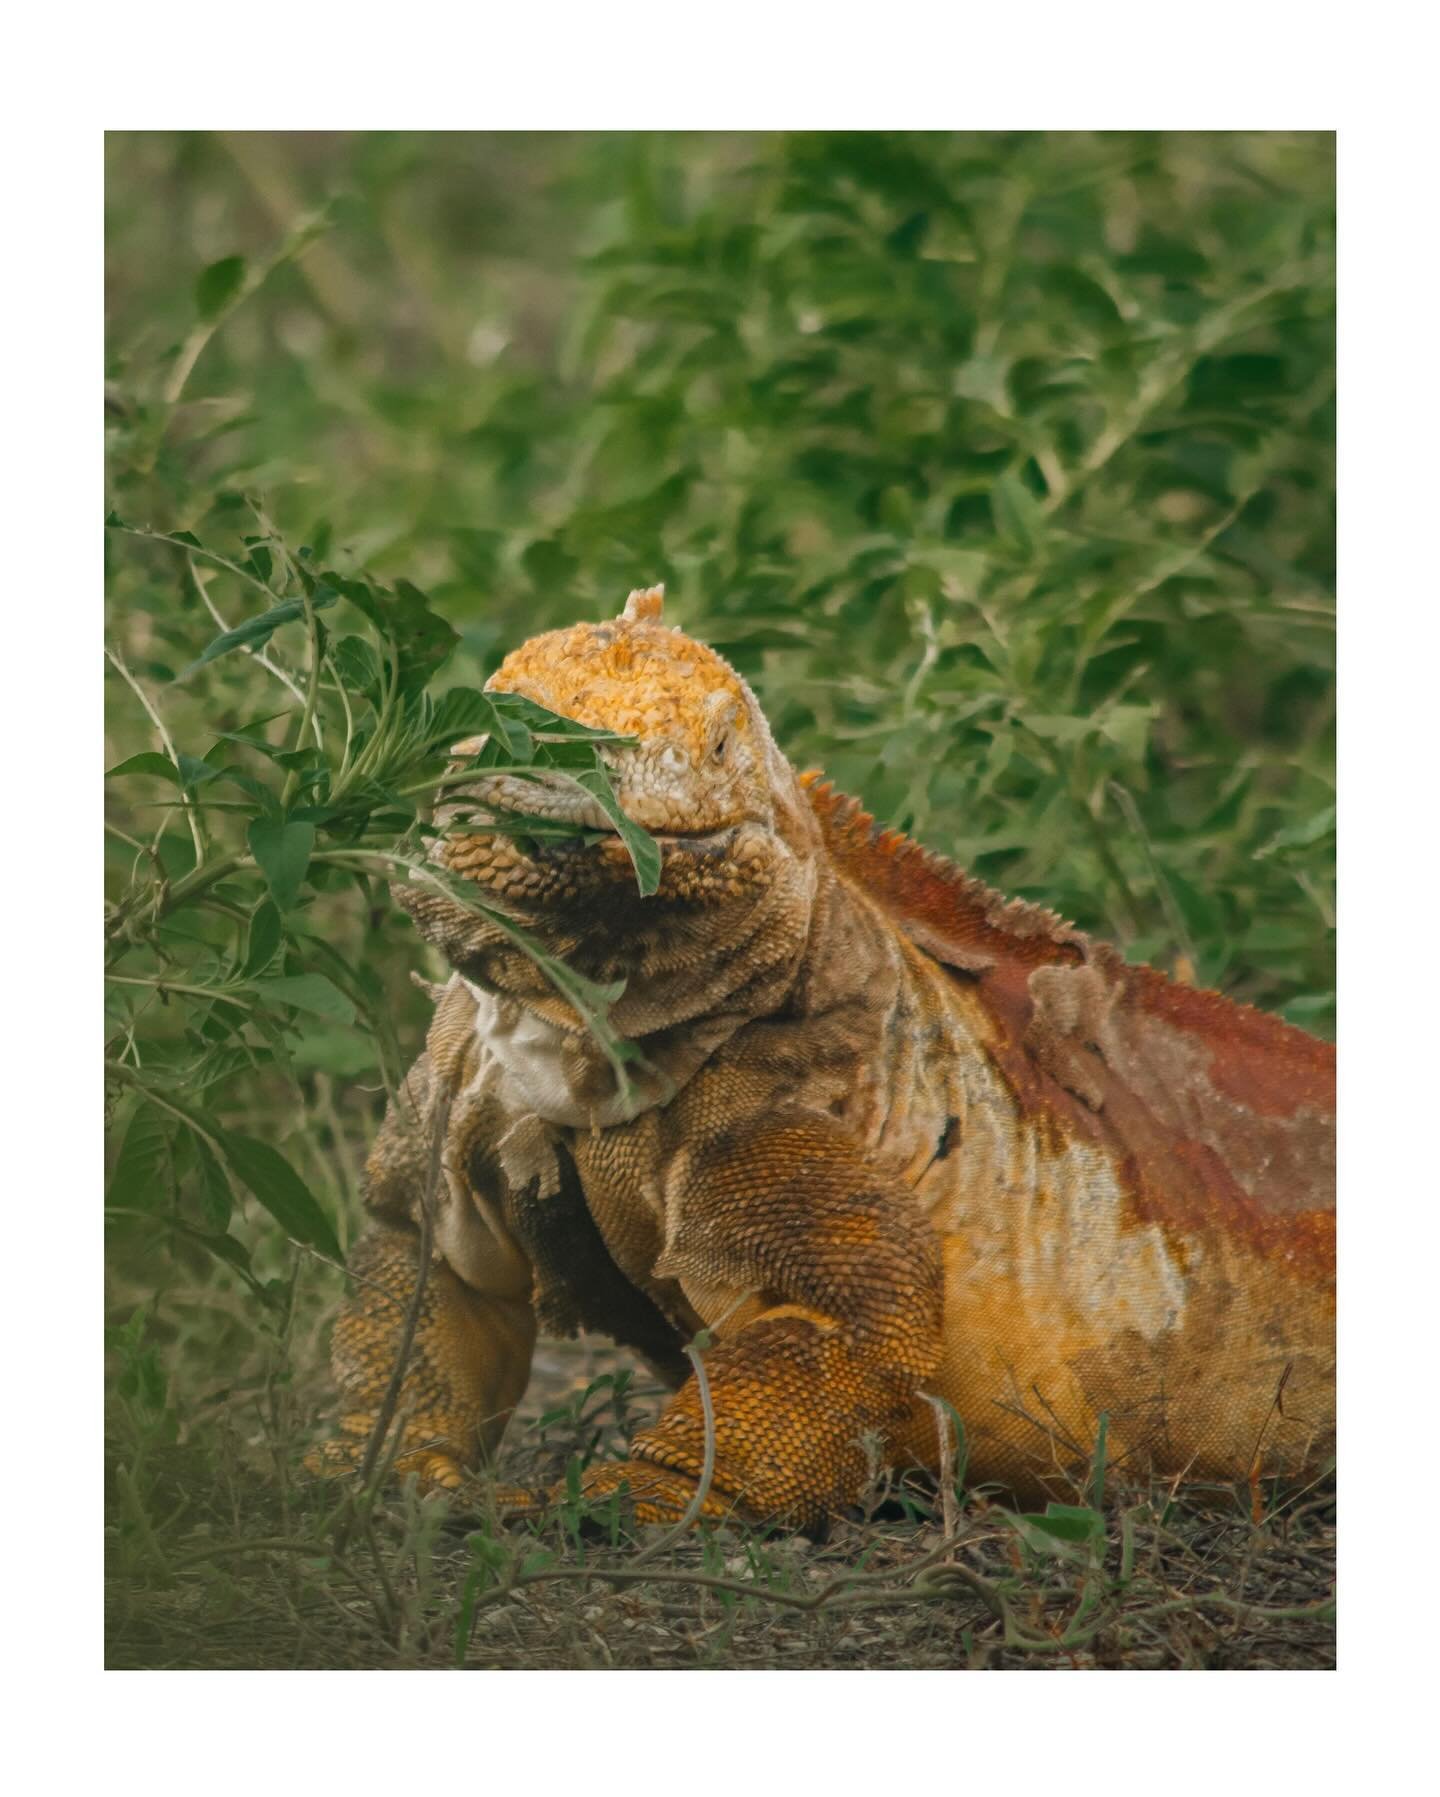 Up close with wildlife of the Galapagos

1. Land iguana &mdash; these sweet little herbivores can get up to 55 years old!

2. Marine iguana &mdash; my favorite! These clumsy cuddlers forage at sea and sneeze out salt. What&rsquo;s not to love?

3. Ga